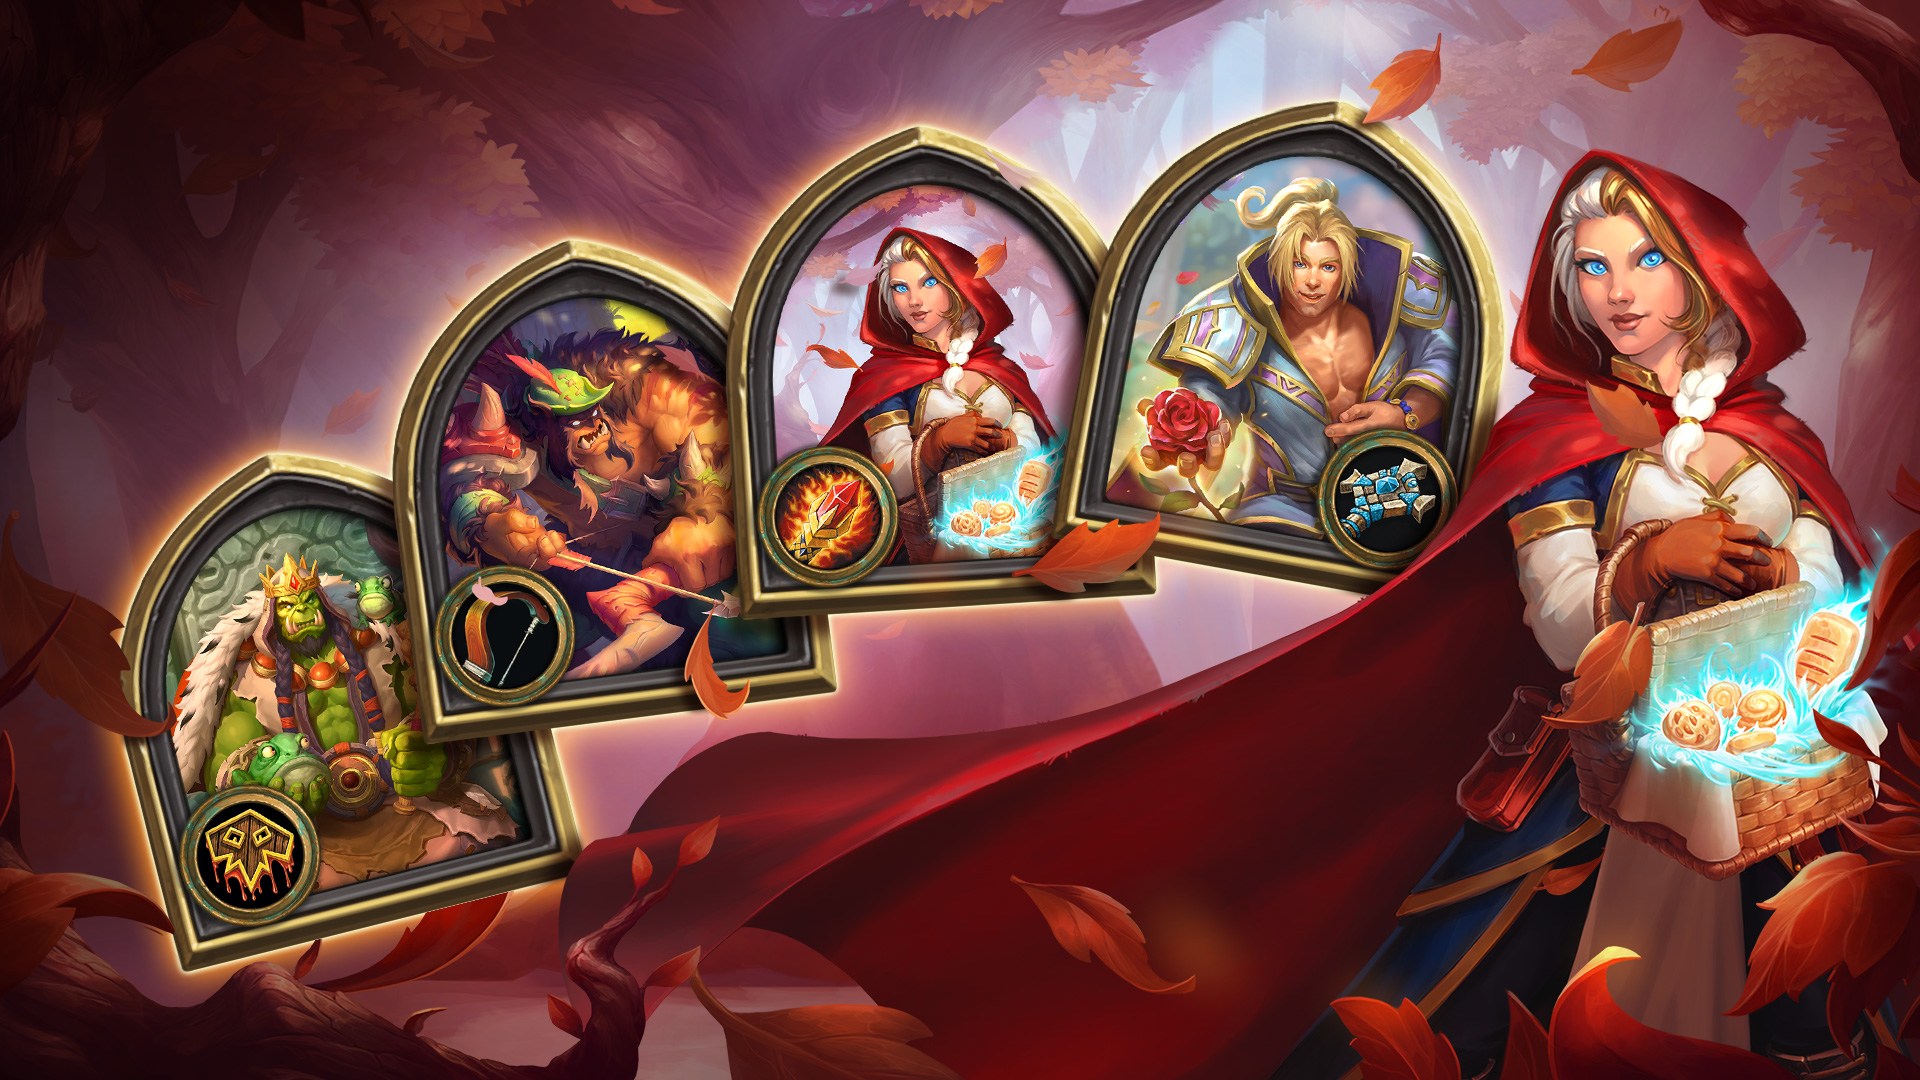 Hearthstone’s Mercenaries Mode’s Trailer Revealed, Patch 21.4 is Now Live In-game